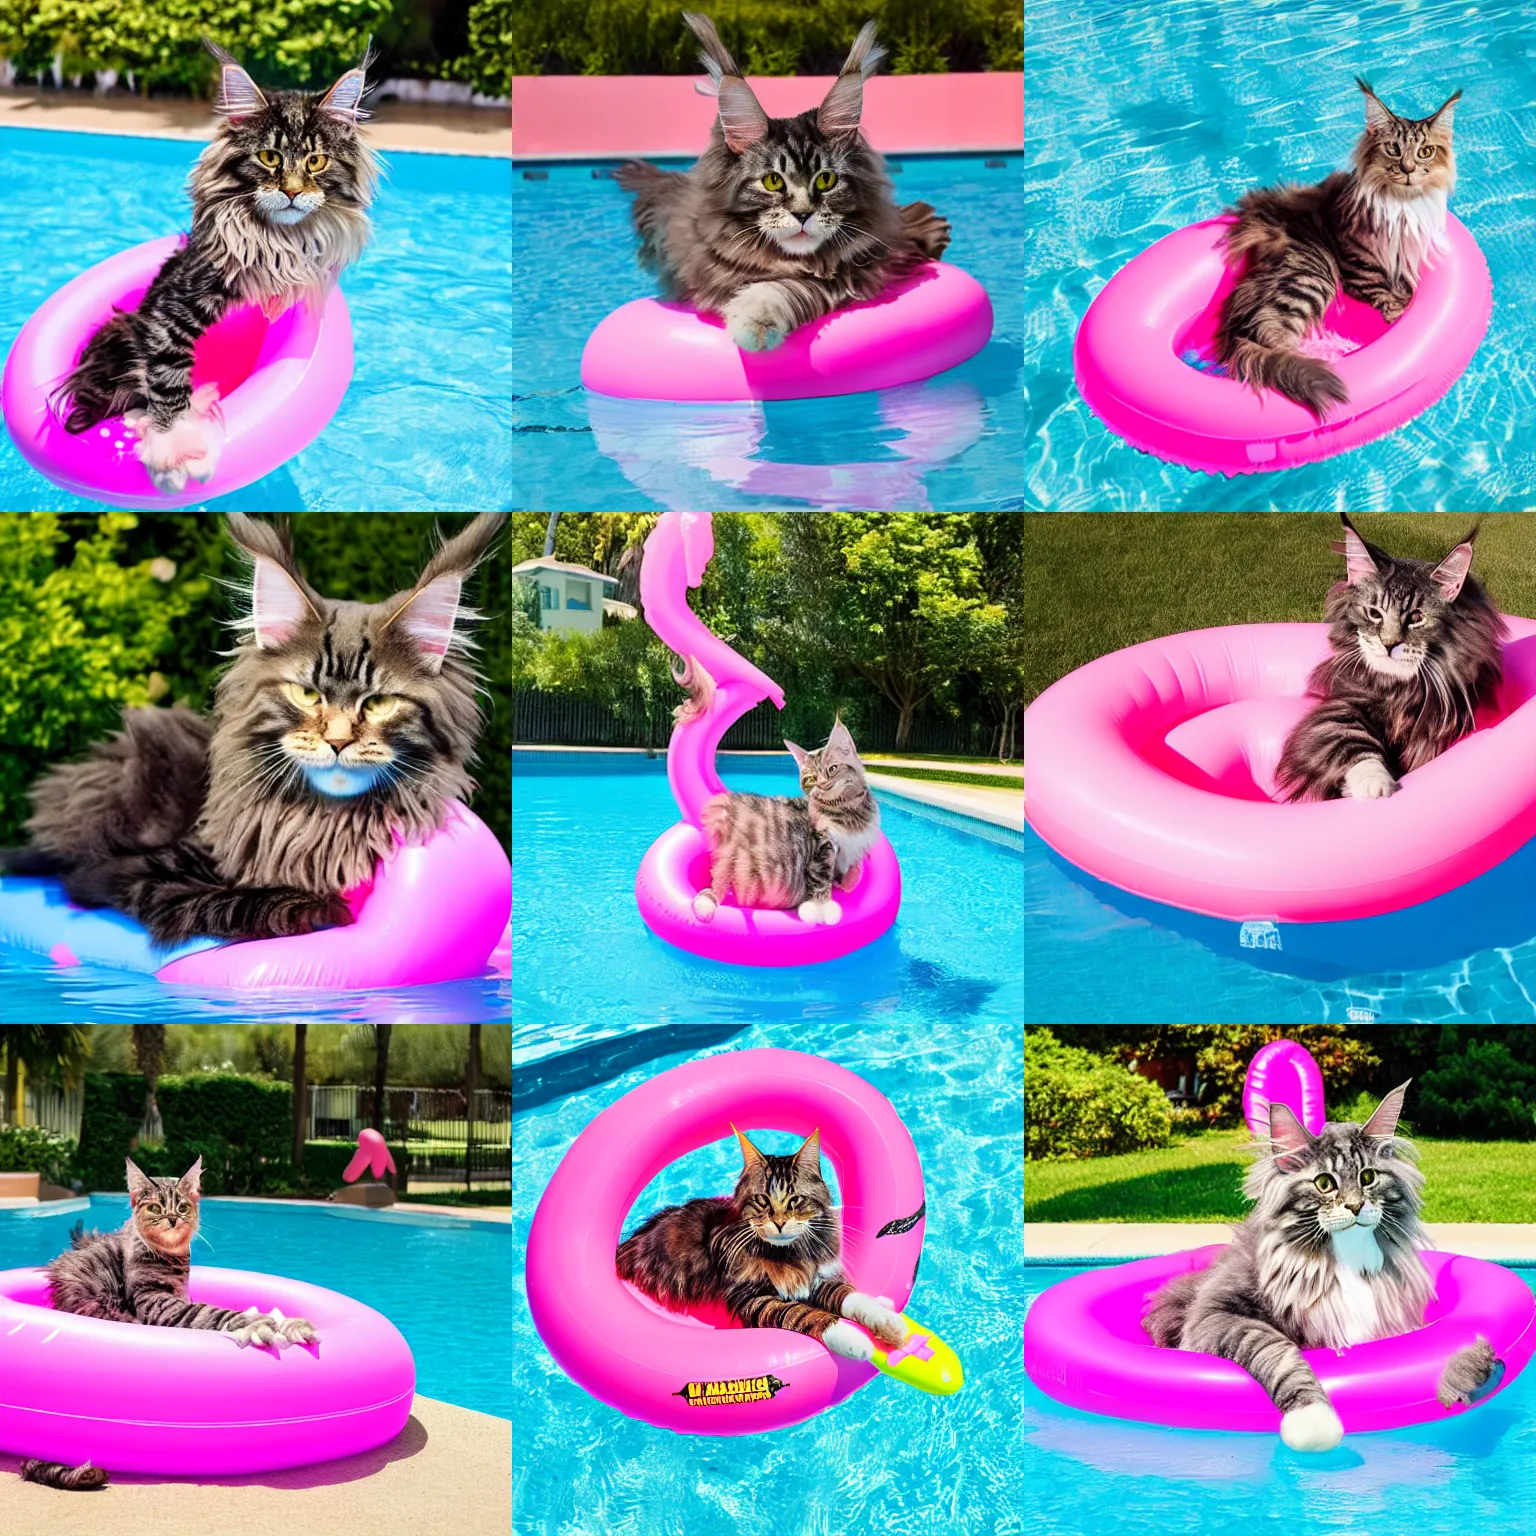 Prompt: Maine Coon cat on pink inflatable flamingo in a pool